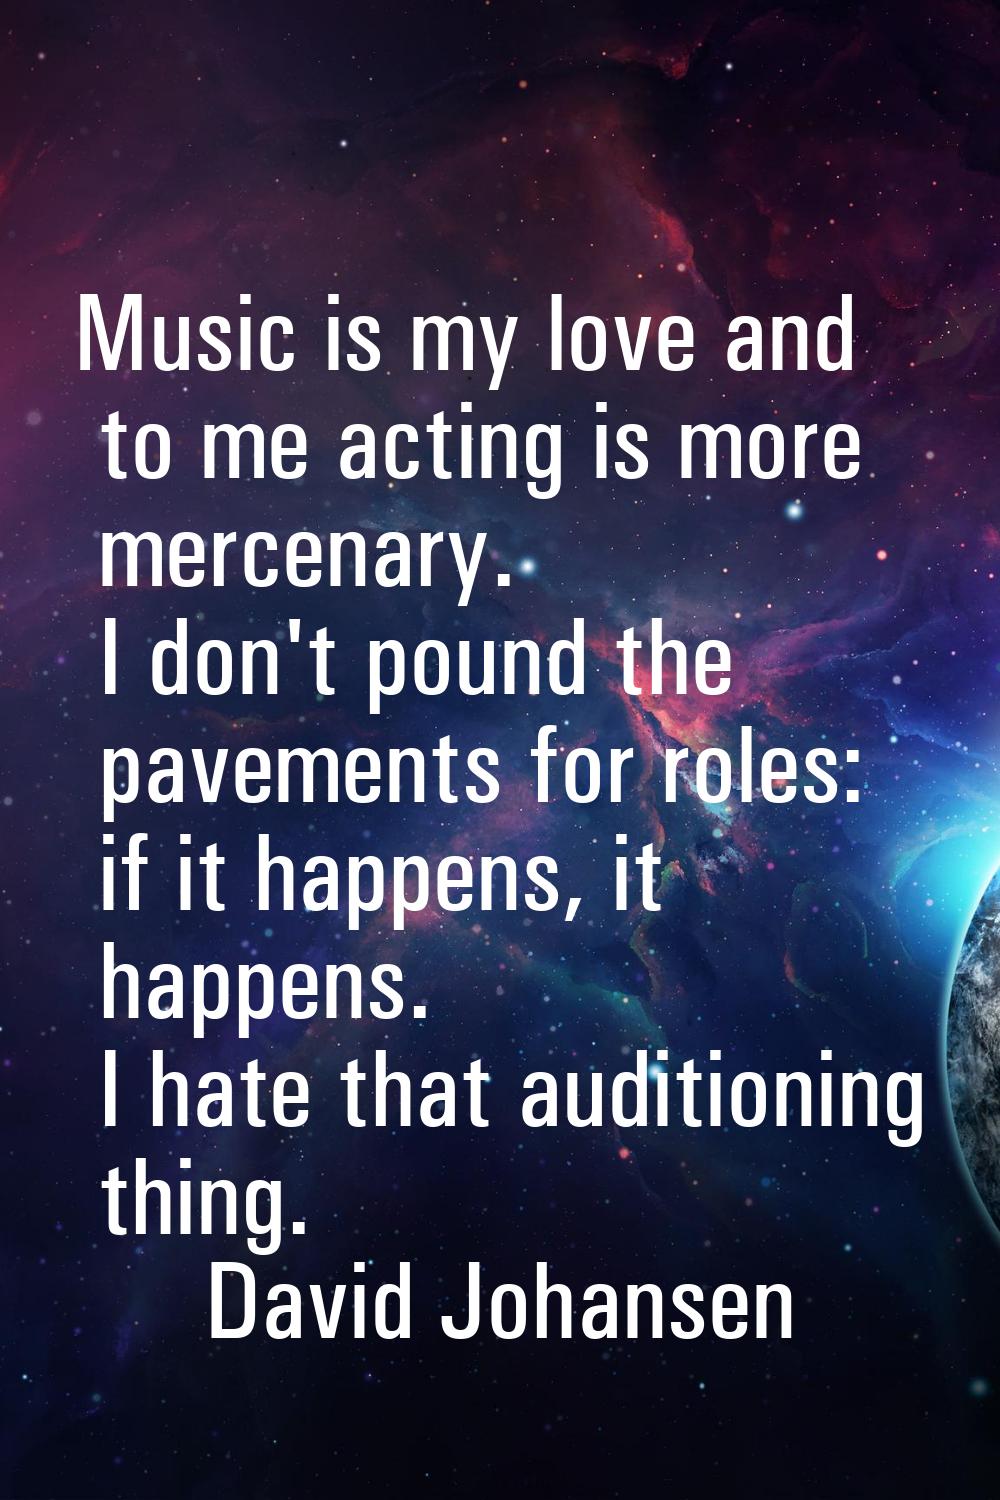 Music is my love and to me acting is more mercenary. I don't pound the pavements for roles: if it h